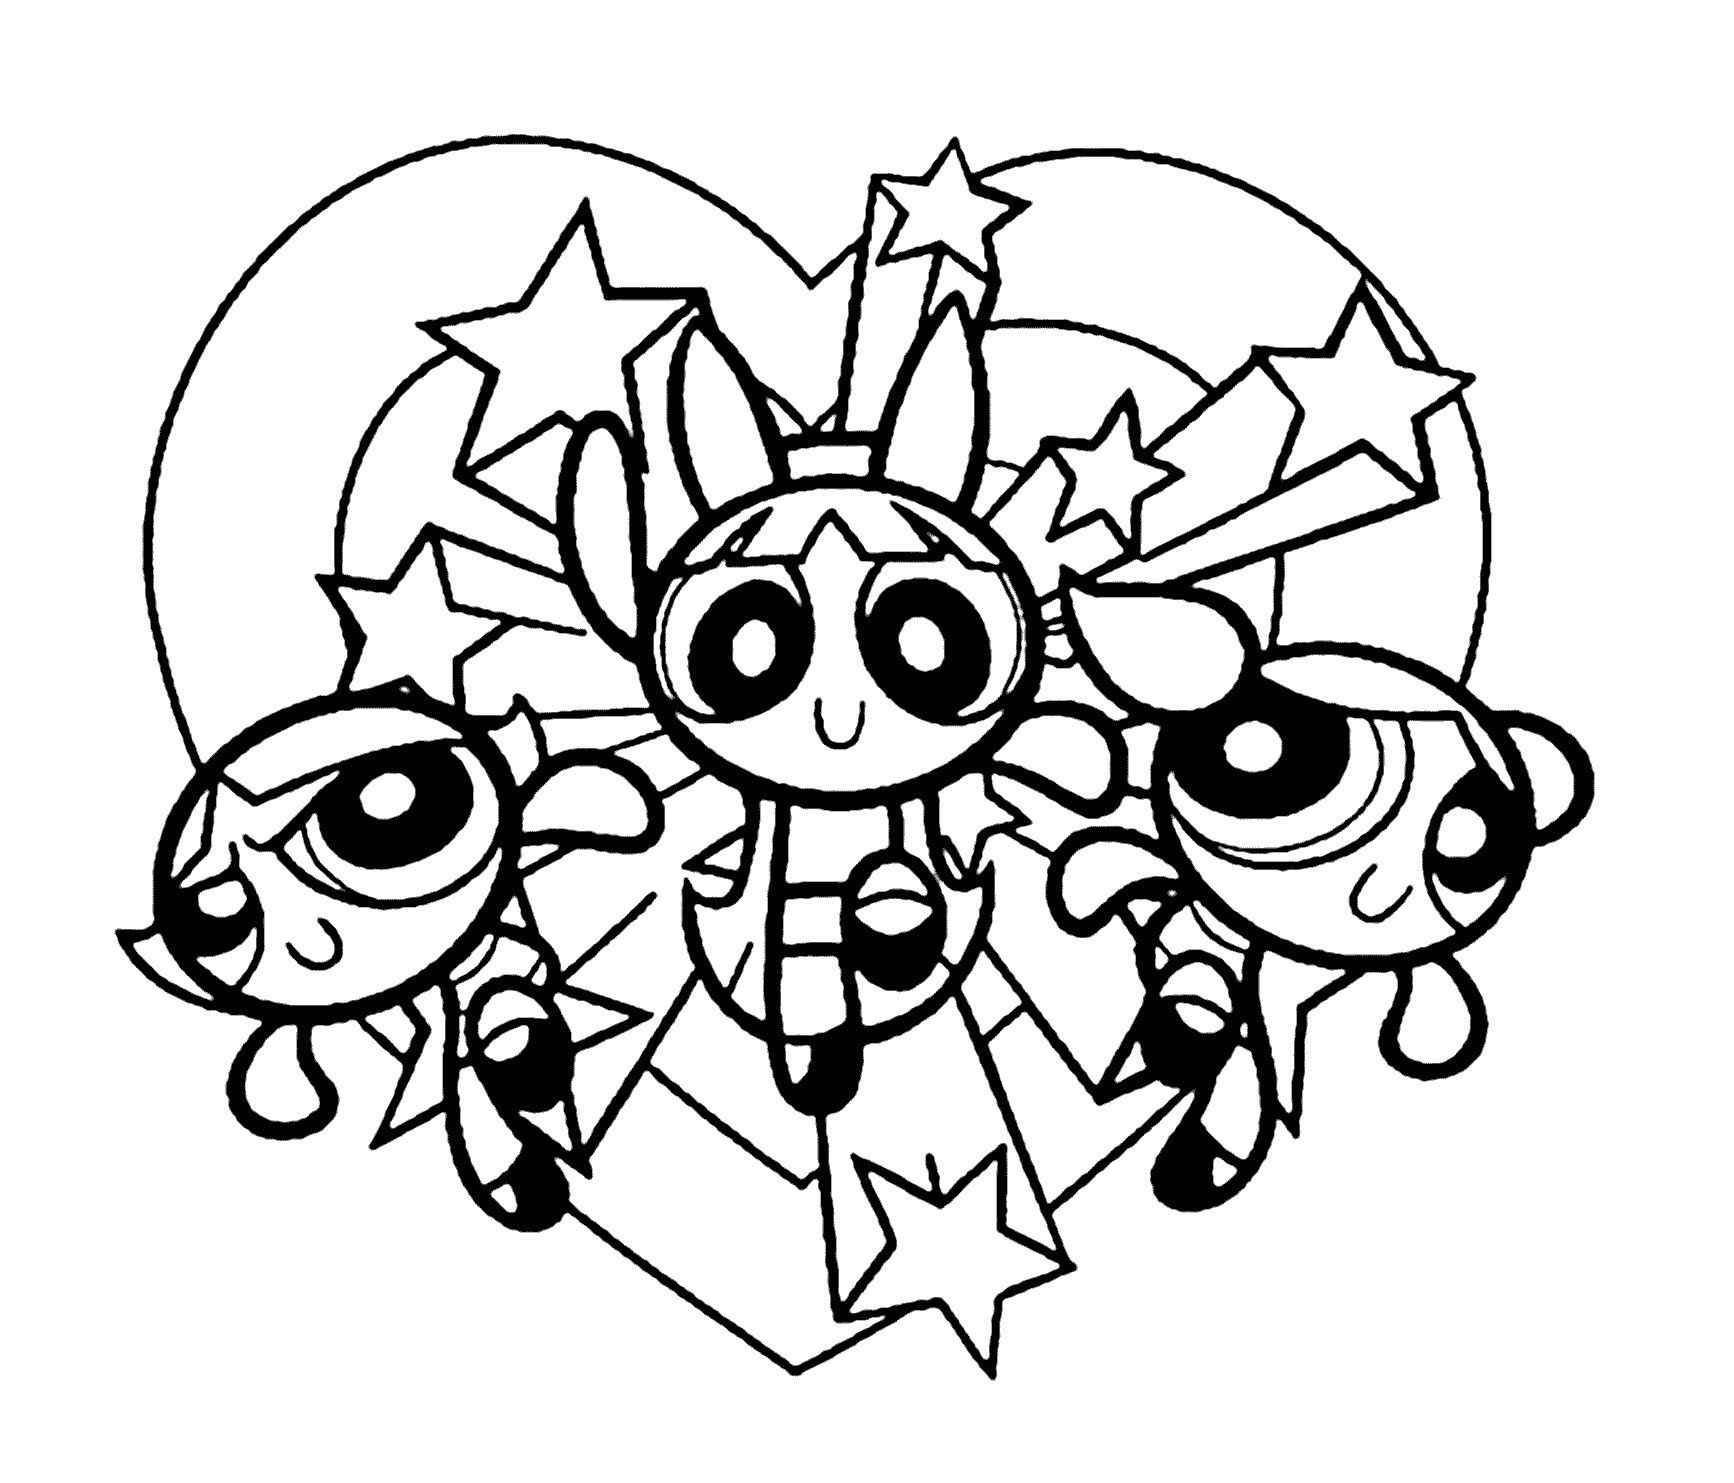 Coloring Sheets For Girls 1224199_powerpuff Pages Of Wallpaper Powerpuff